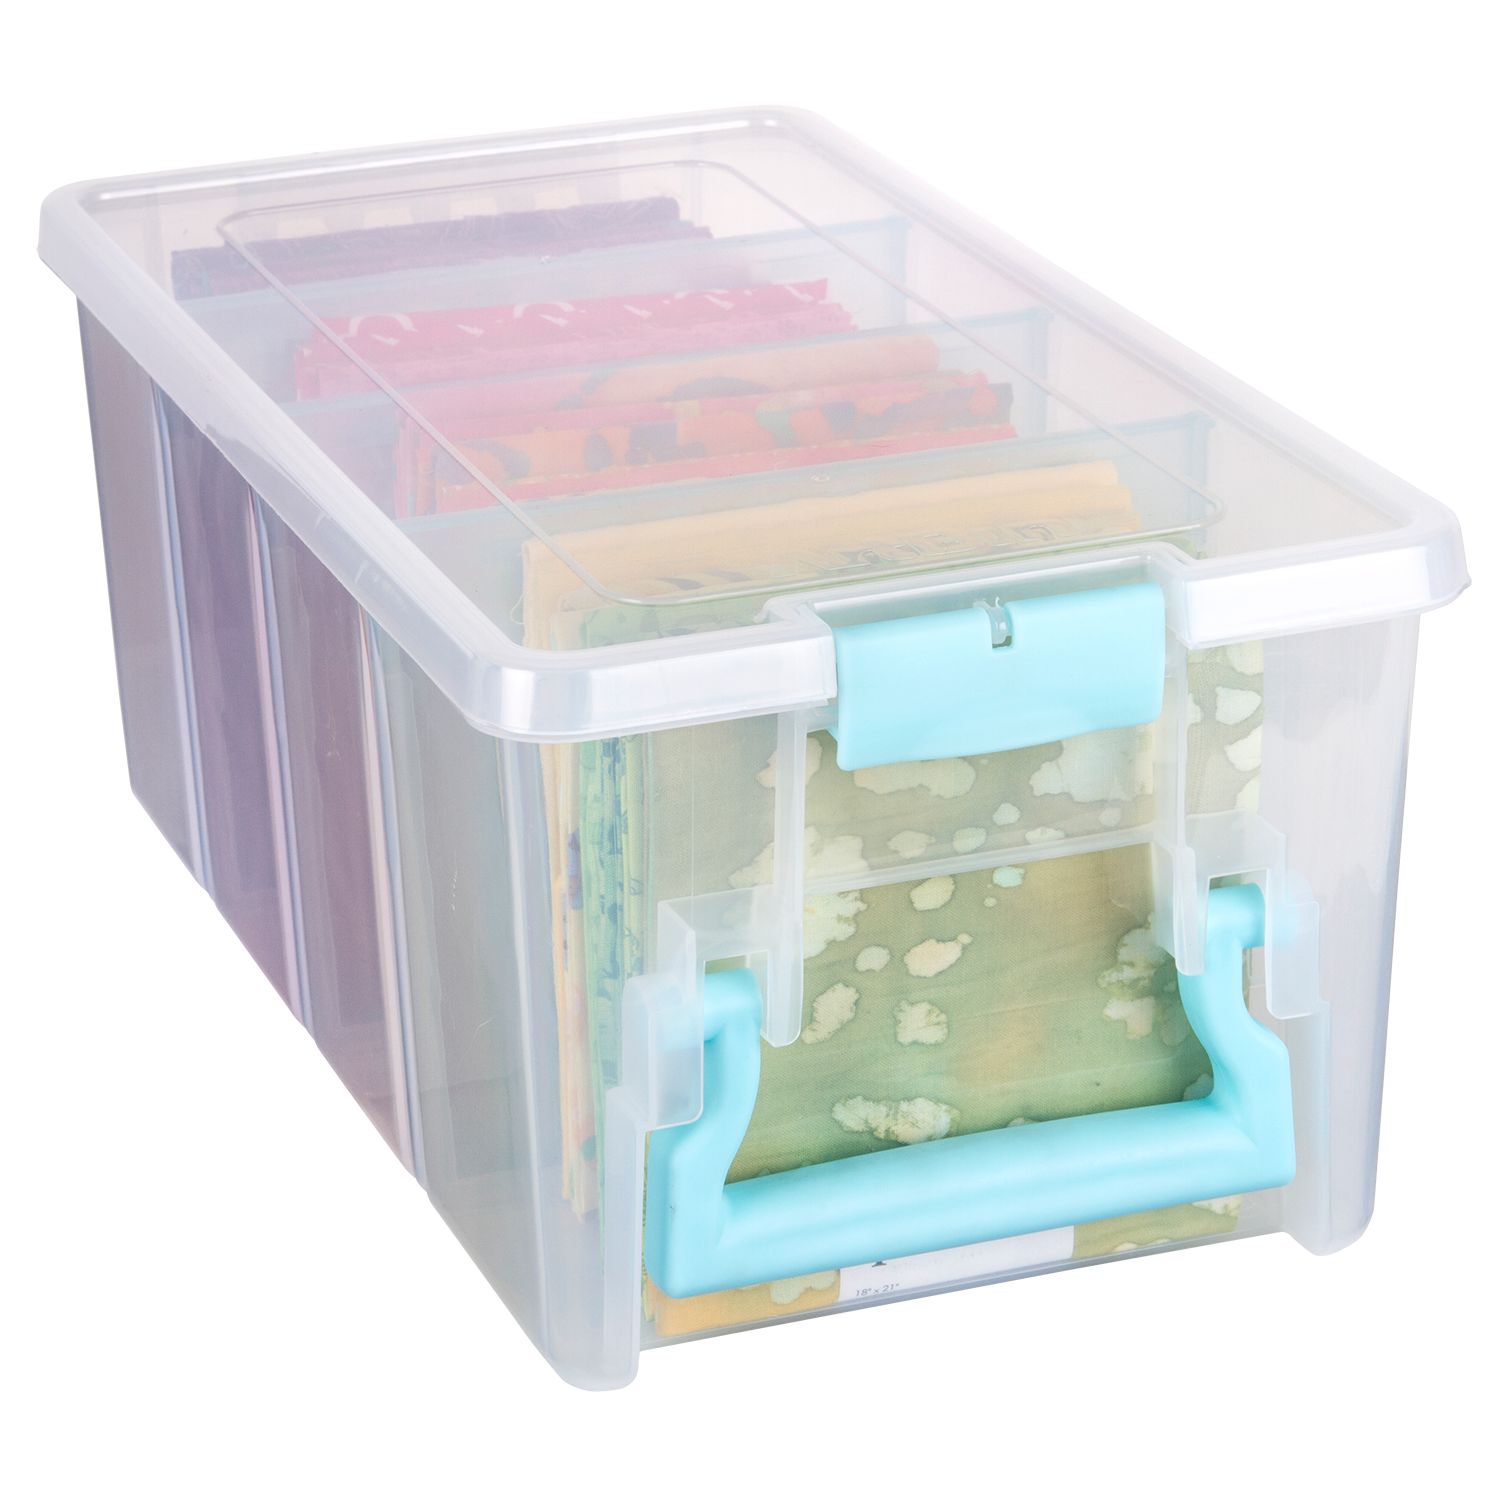 Semi Satchel with Removable Dividers Plastic Storage Case Clear with Aqua Accents 